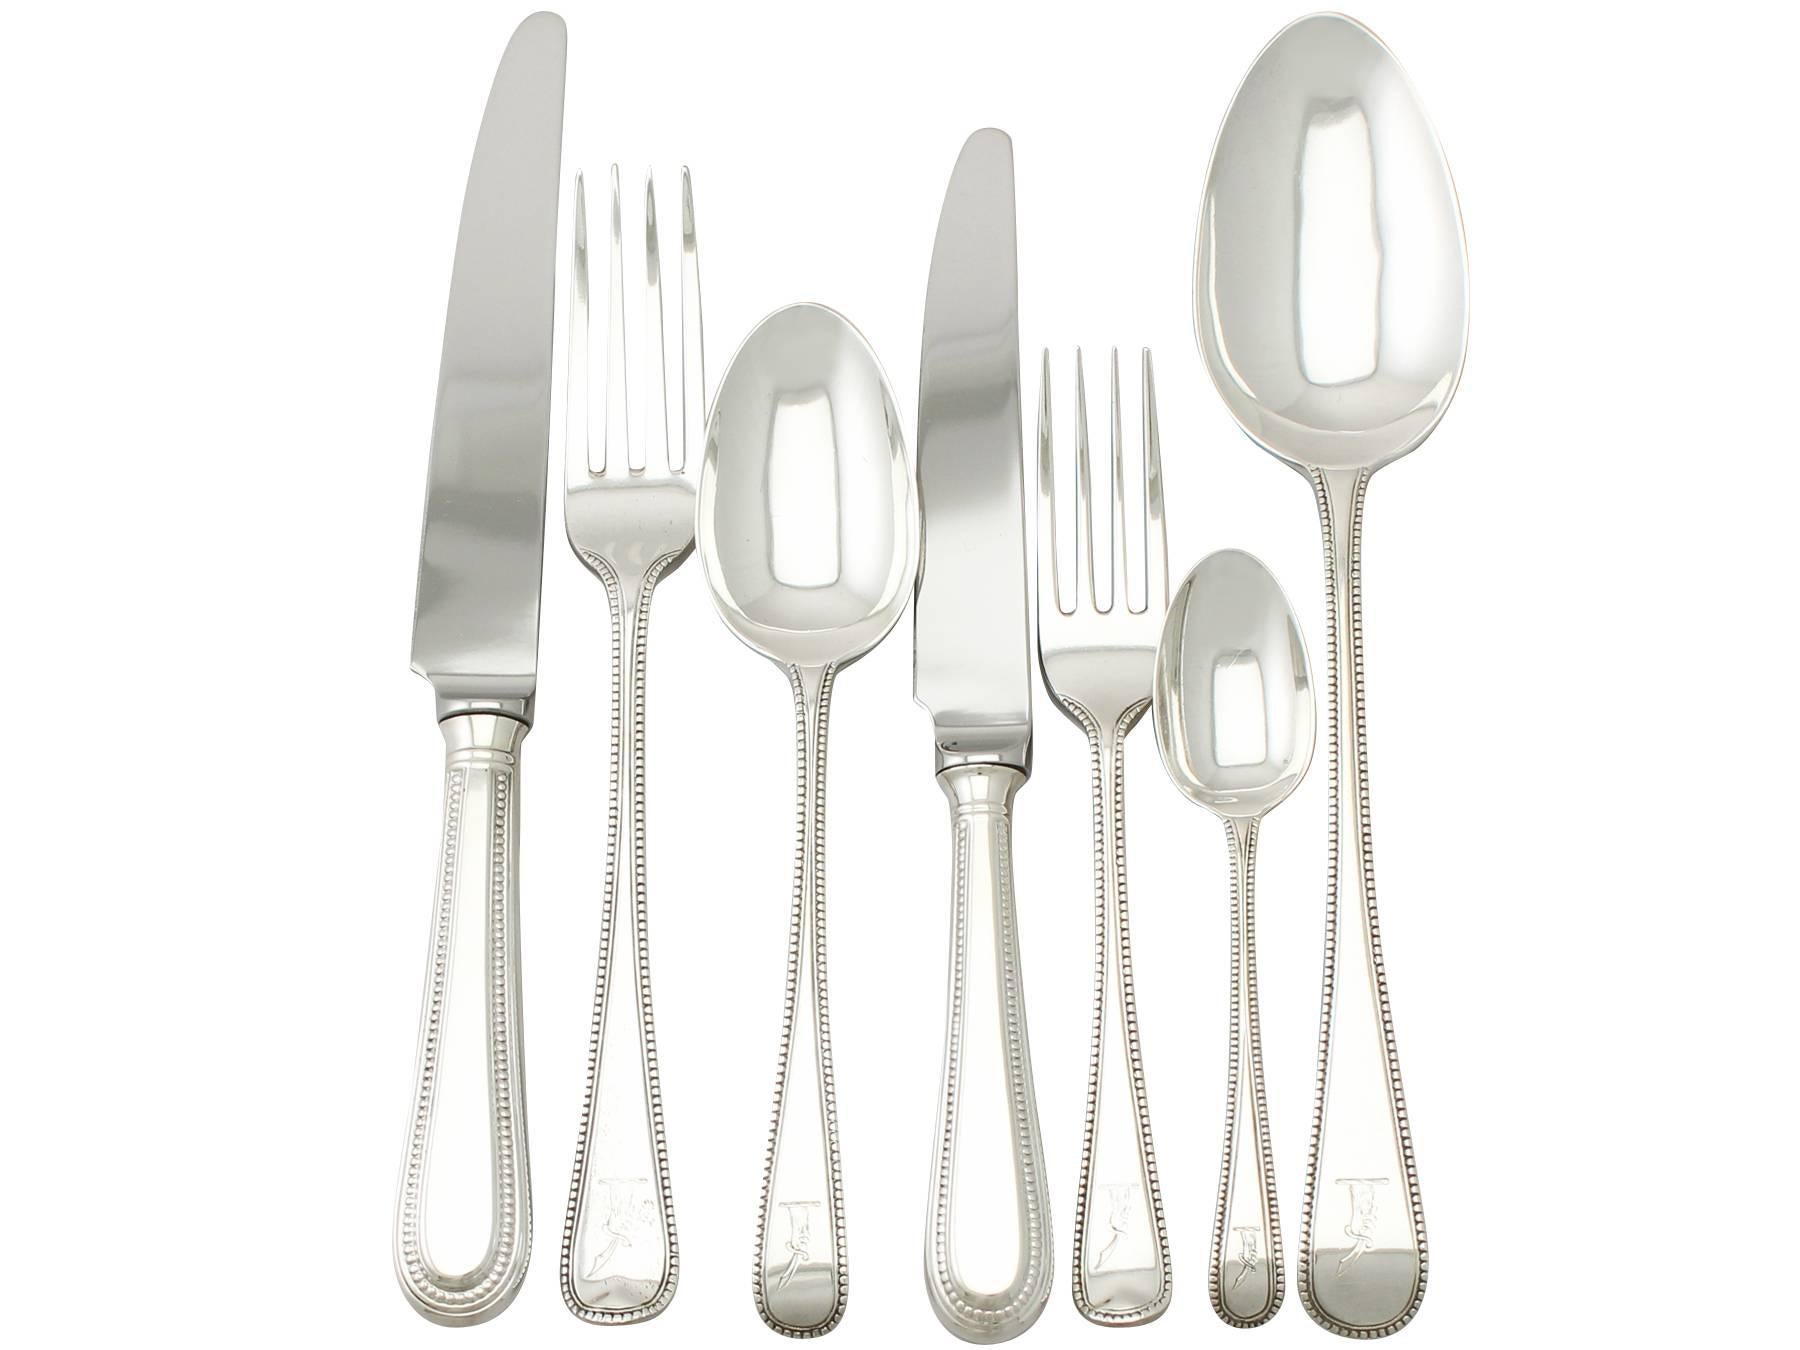 An exceptional, fine and impressive antique George V English sterling silver straight Old English Bead pattern flatware set / service for 12 persons; an addition to our canteen of cutlery collection.

The pieces of this exceptional, antique George